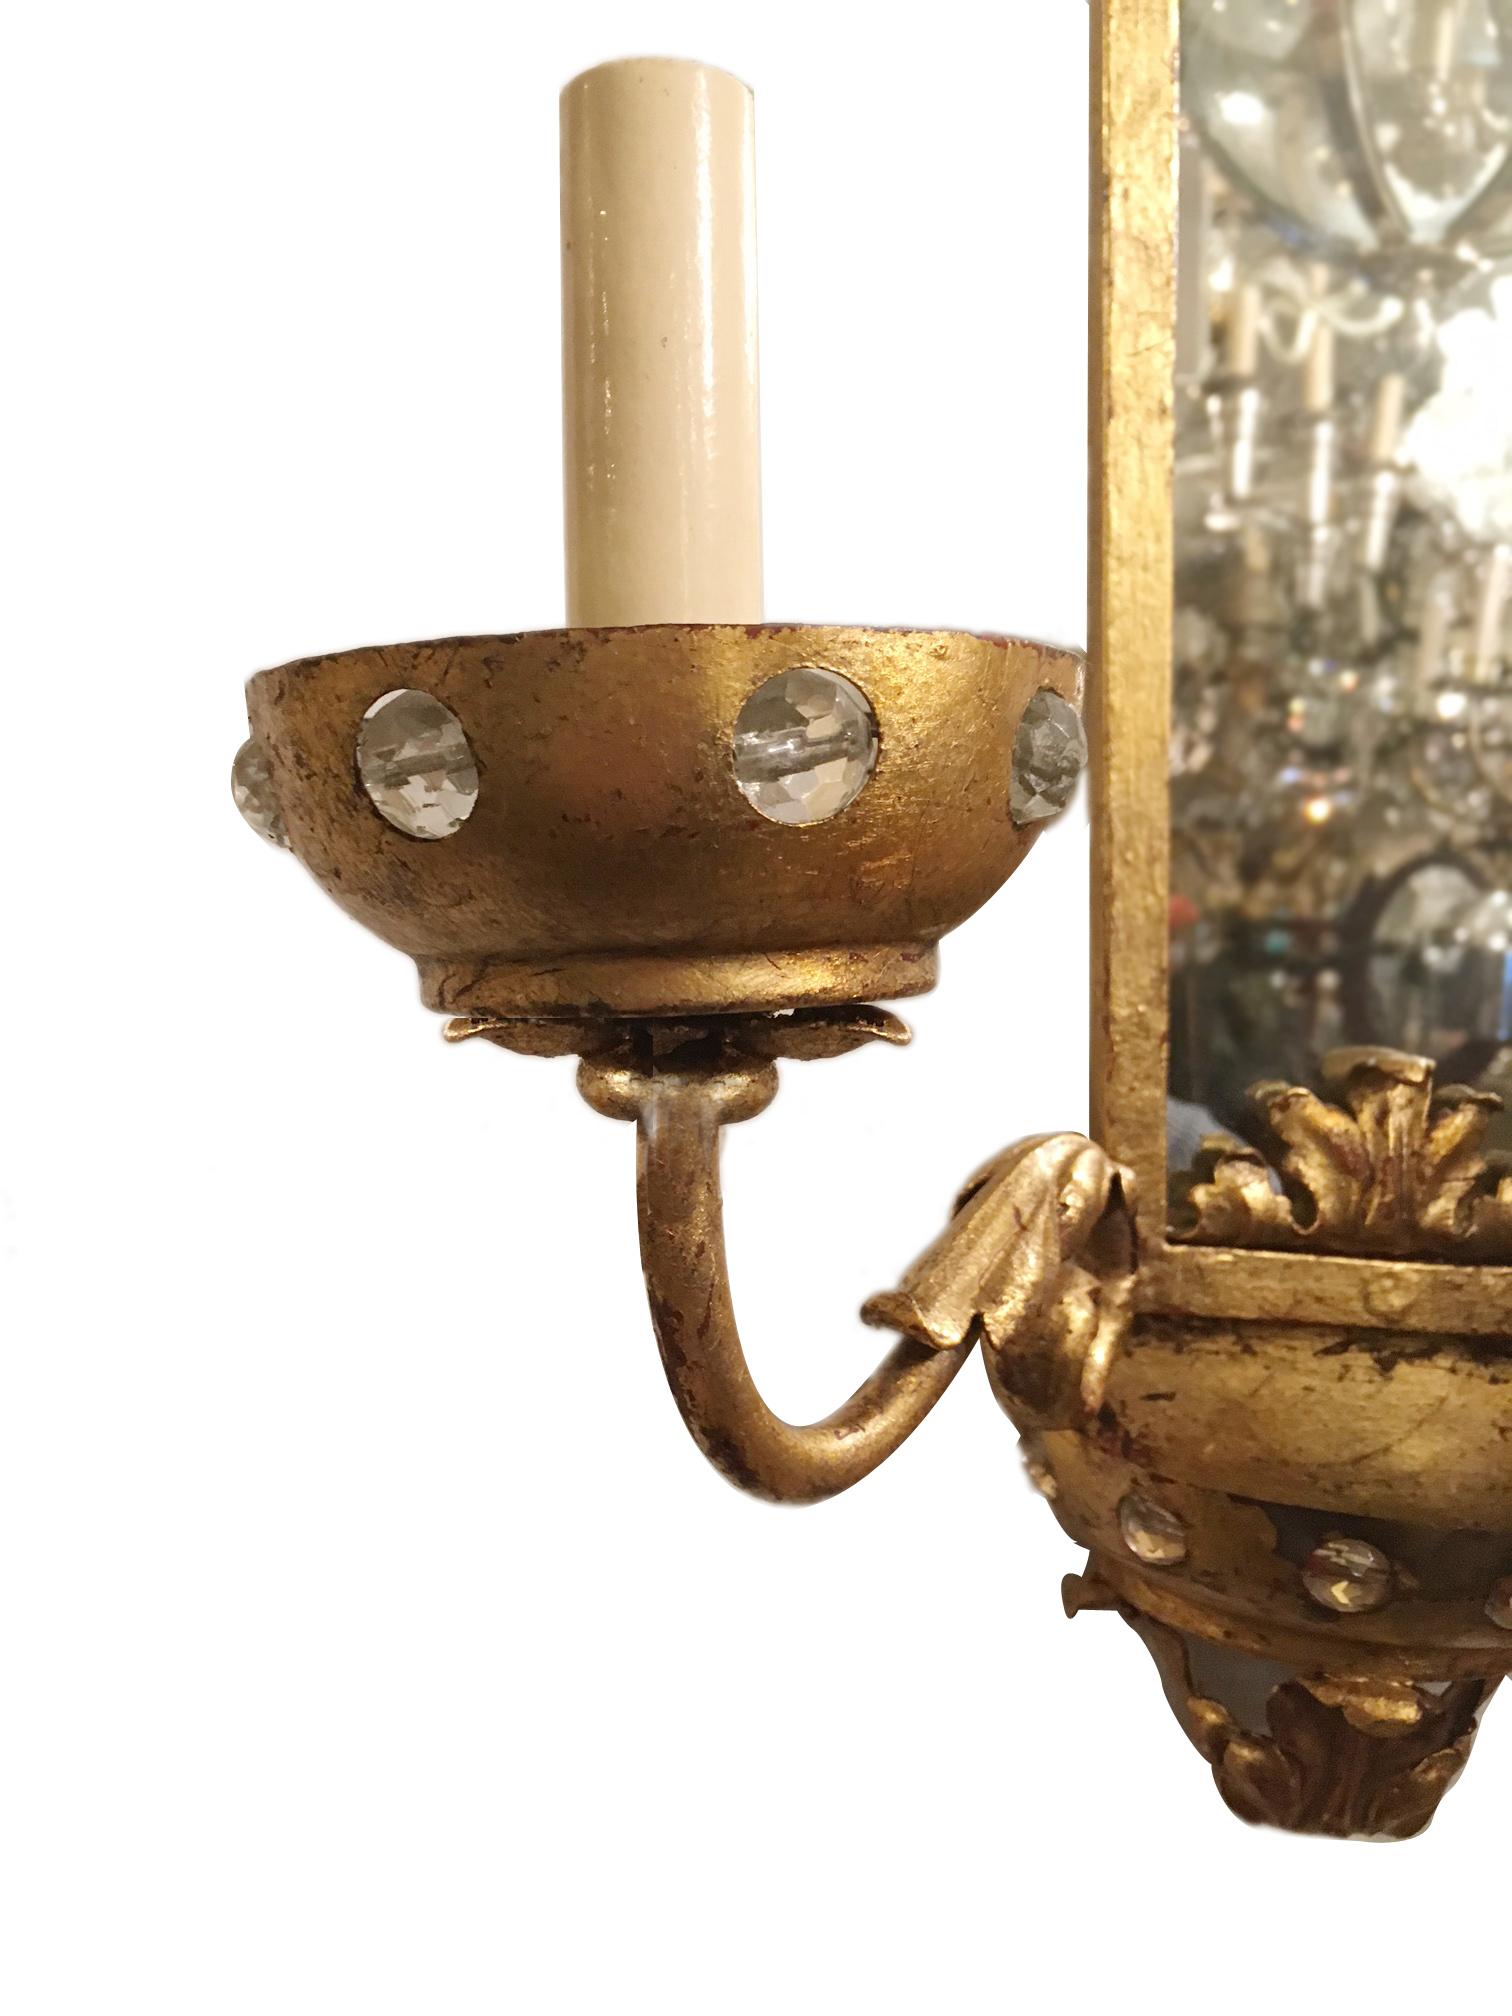 Set of four circa 1920's French gilt metal tw0-arm arms sconces with mirrored backplates and crystal-inset bobeches. Sold per pair.

Measurements
Height: 17